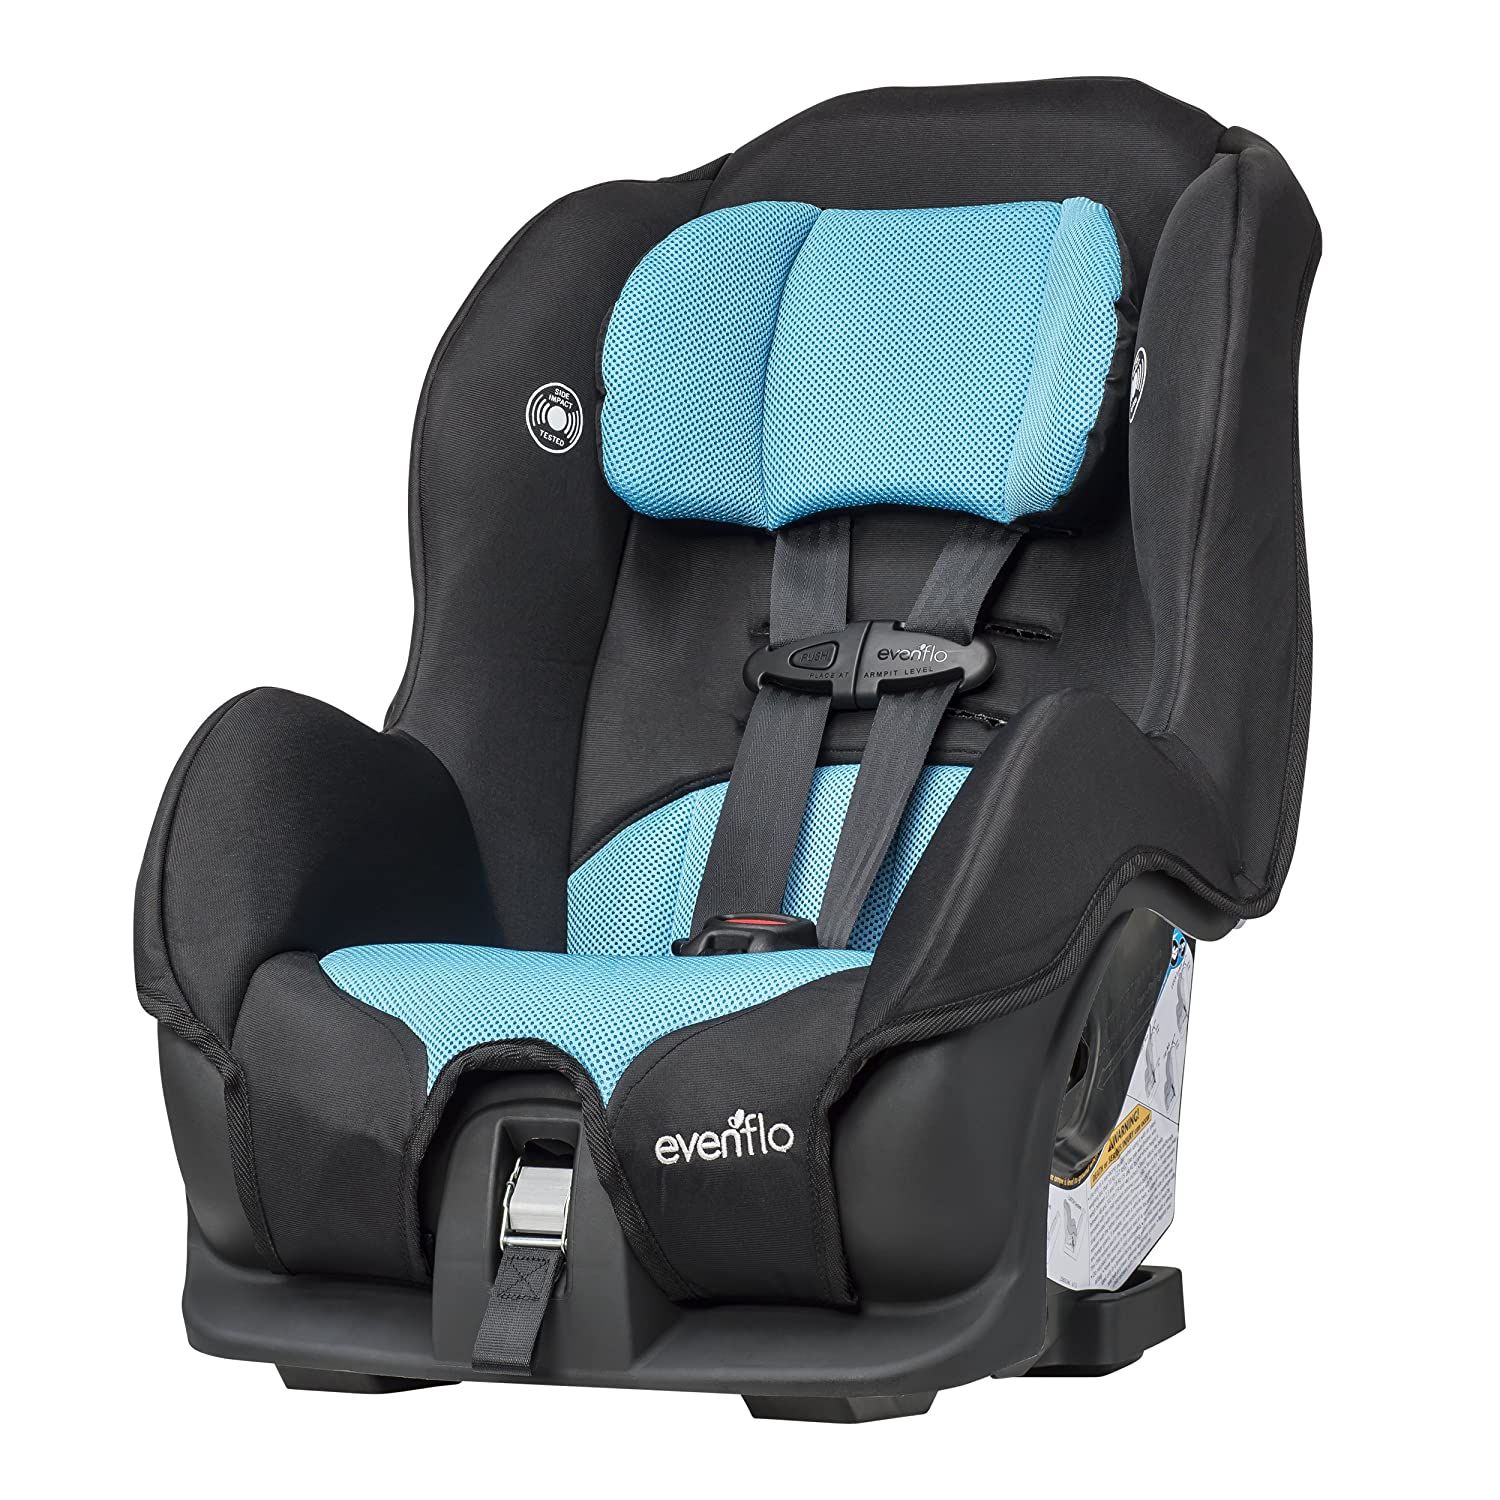 Best convertible car seat for baby